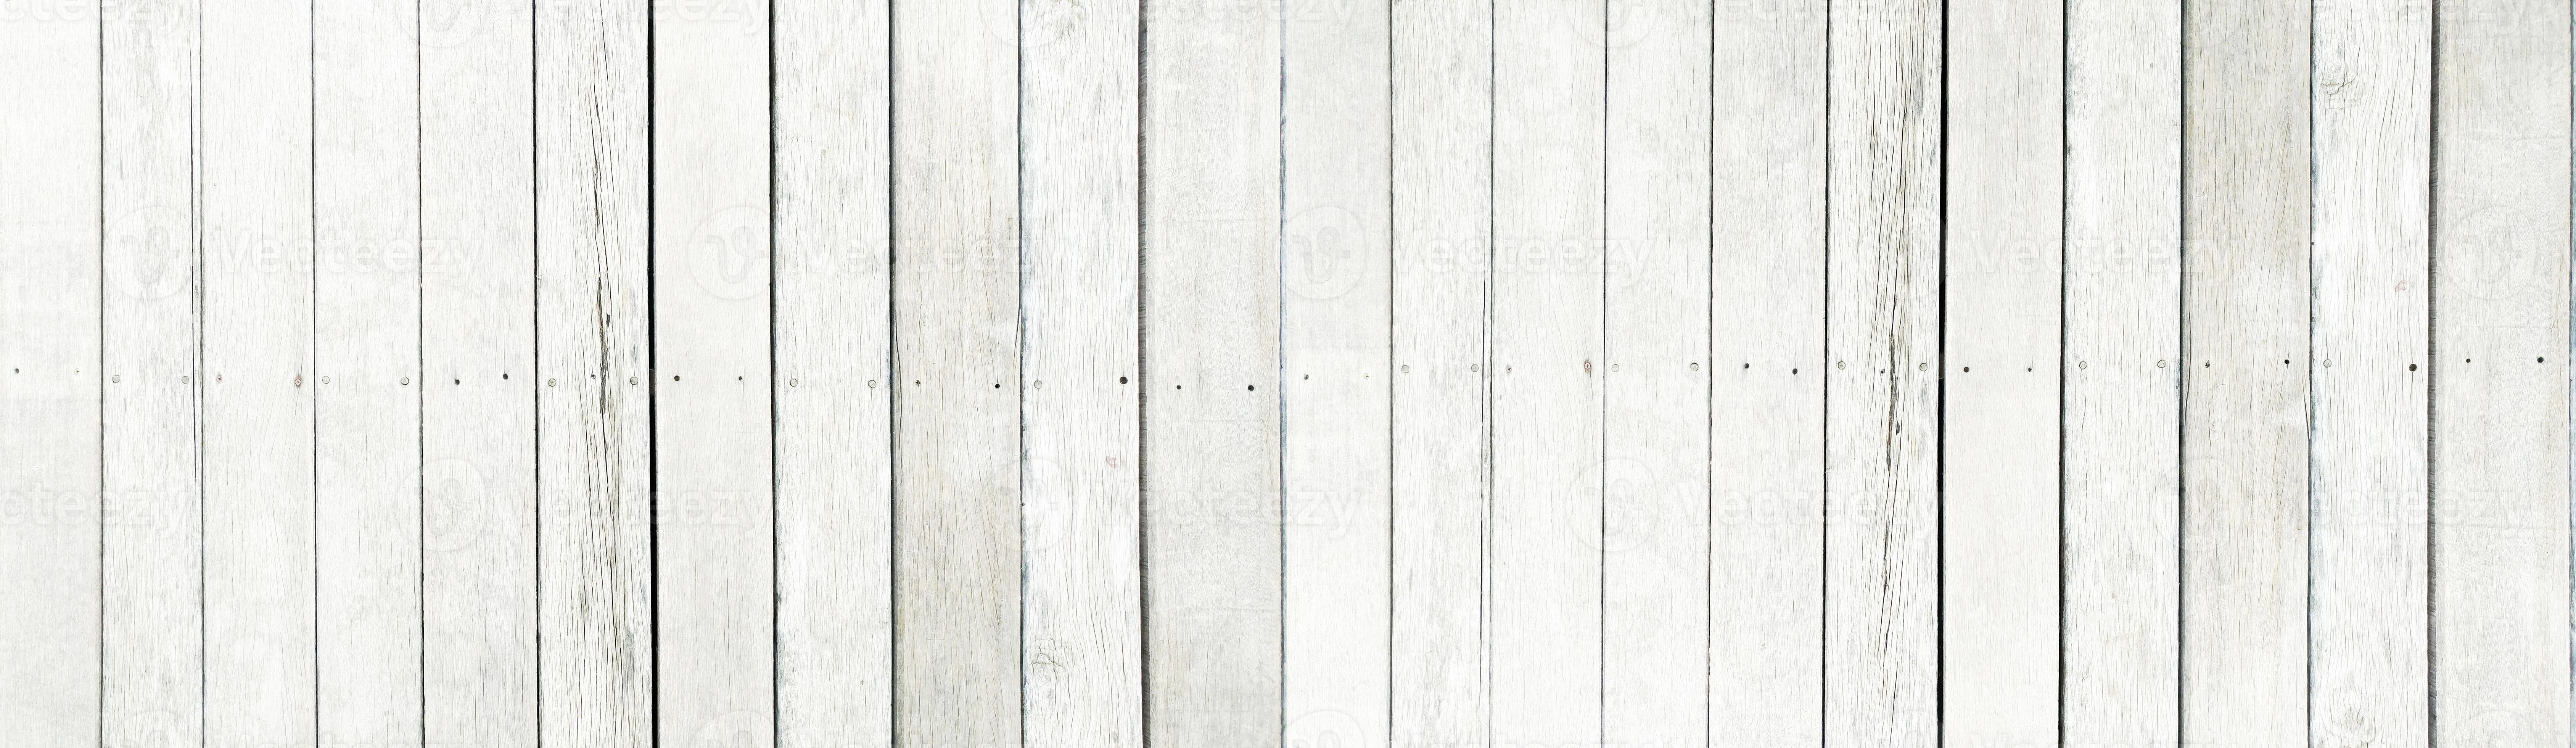 The Old white wooden lath pattern texture background photo